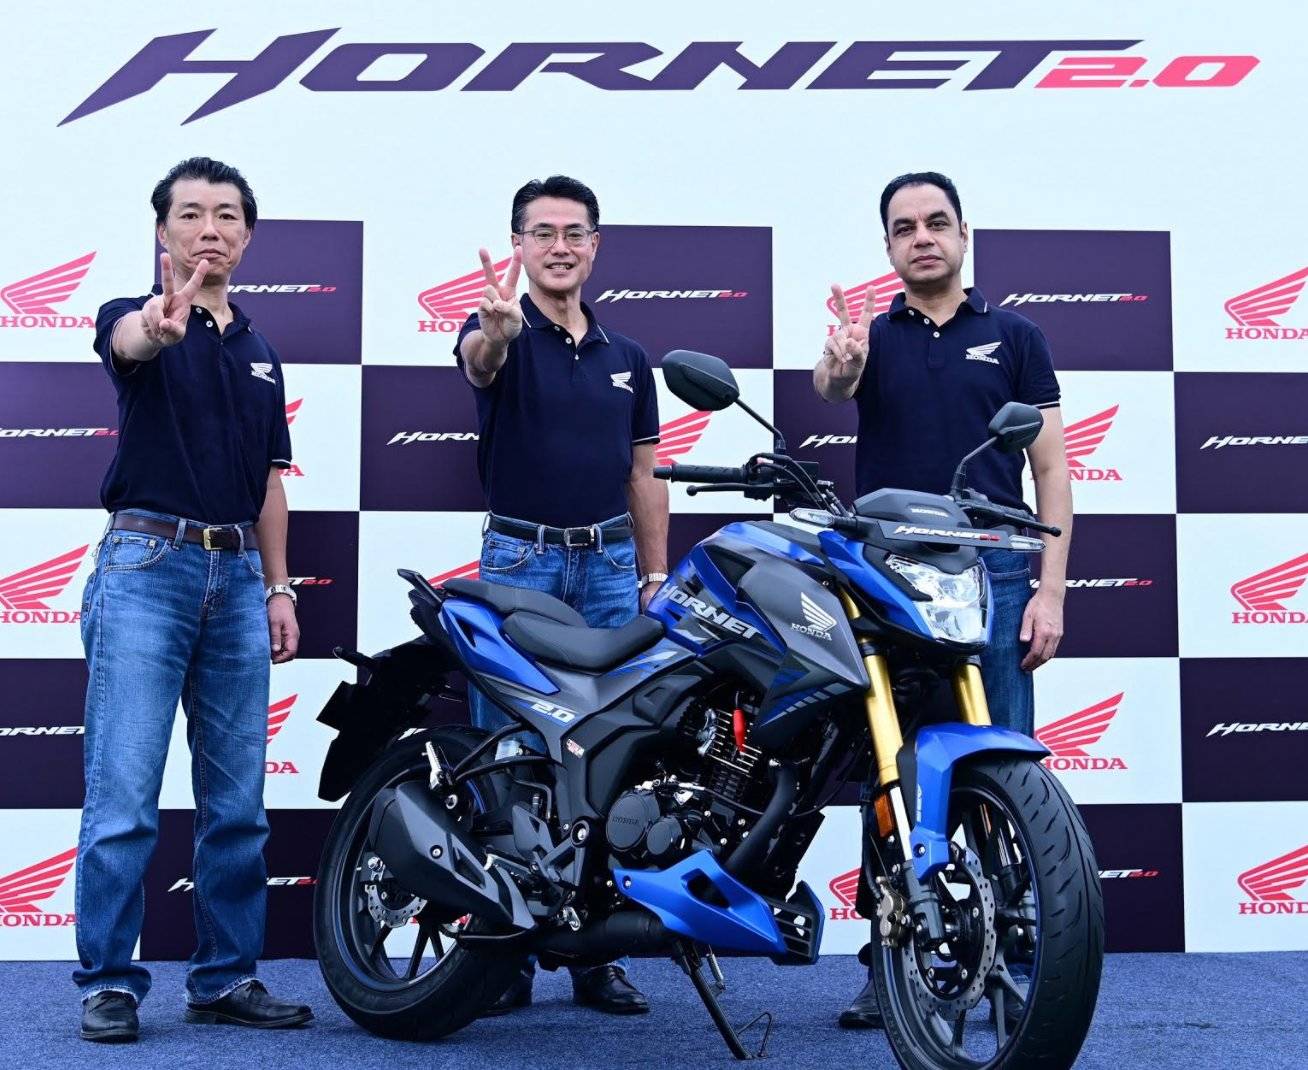 The Hornet 2.0 will be offered with a 6-year warranty package (3 years standard + 3 years optional extended warranty). 